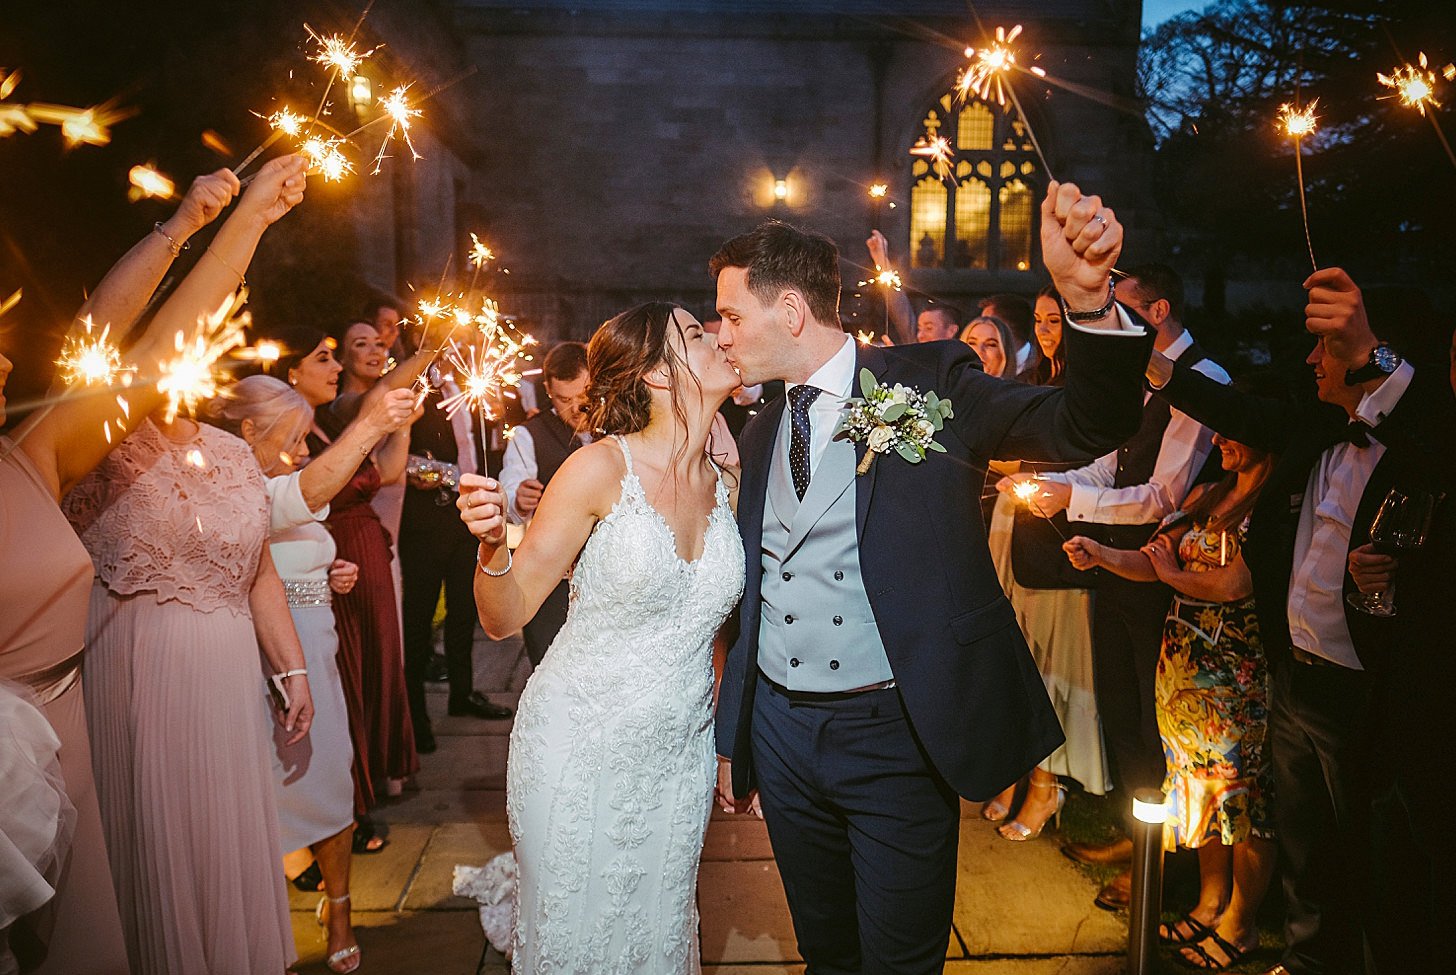 Sparks were flying with Grace and Shaun at Ellingham Hall.

@ellinghamhall 

#wedding #weddings #weddingday #photo #photography #photographer #weddingphotography #weddingphotographer #northeastphotography #northeastwedding #northeastweddings #northea